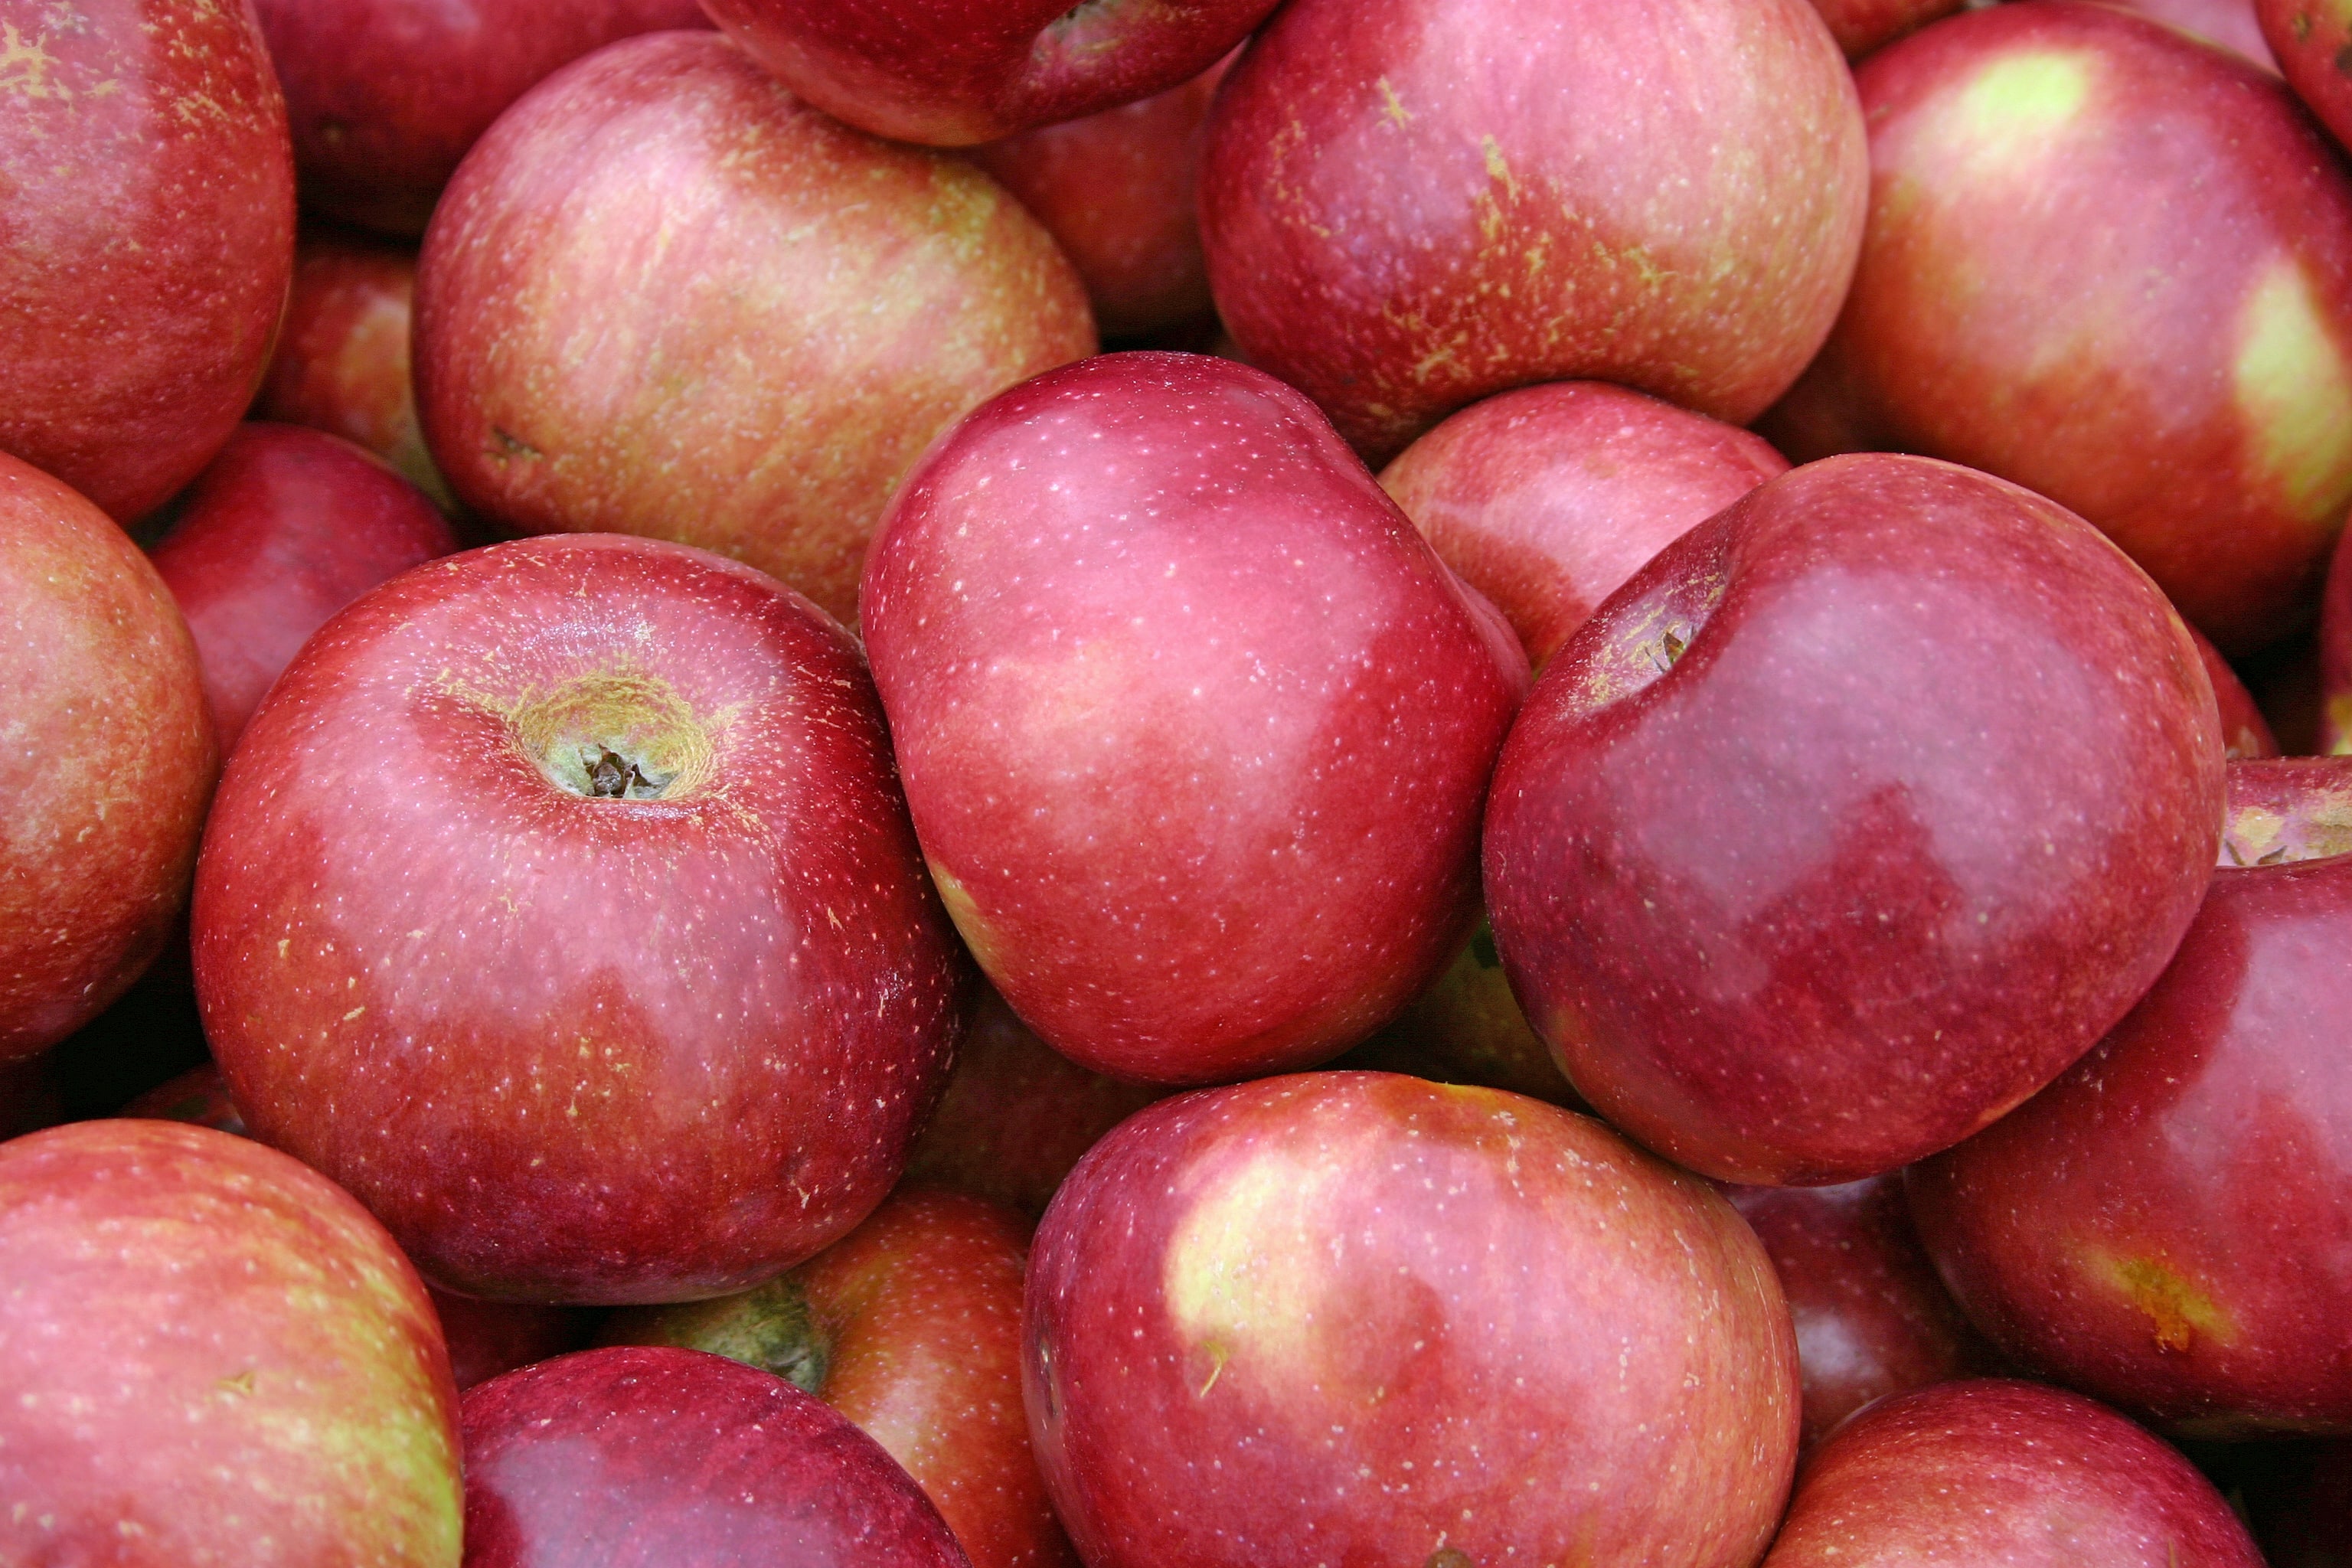 A large group of beautiful red apples